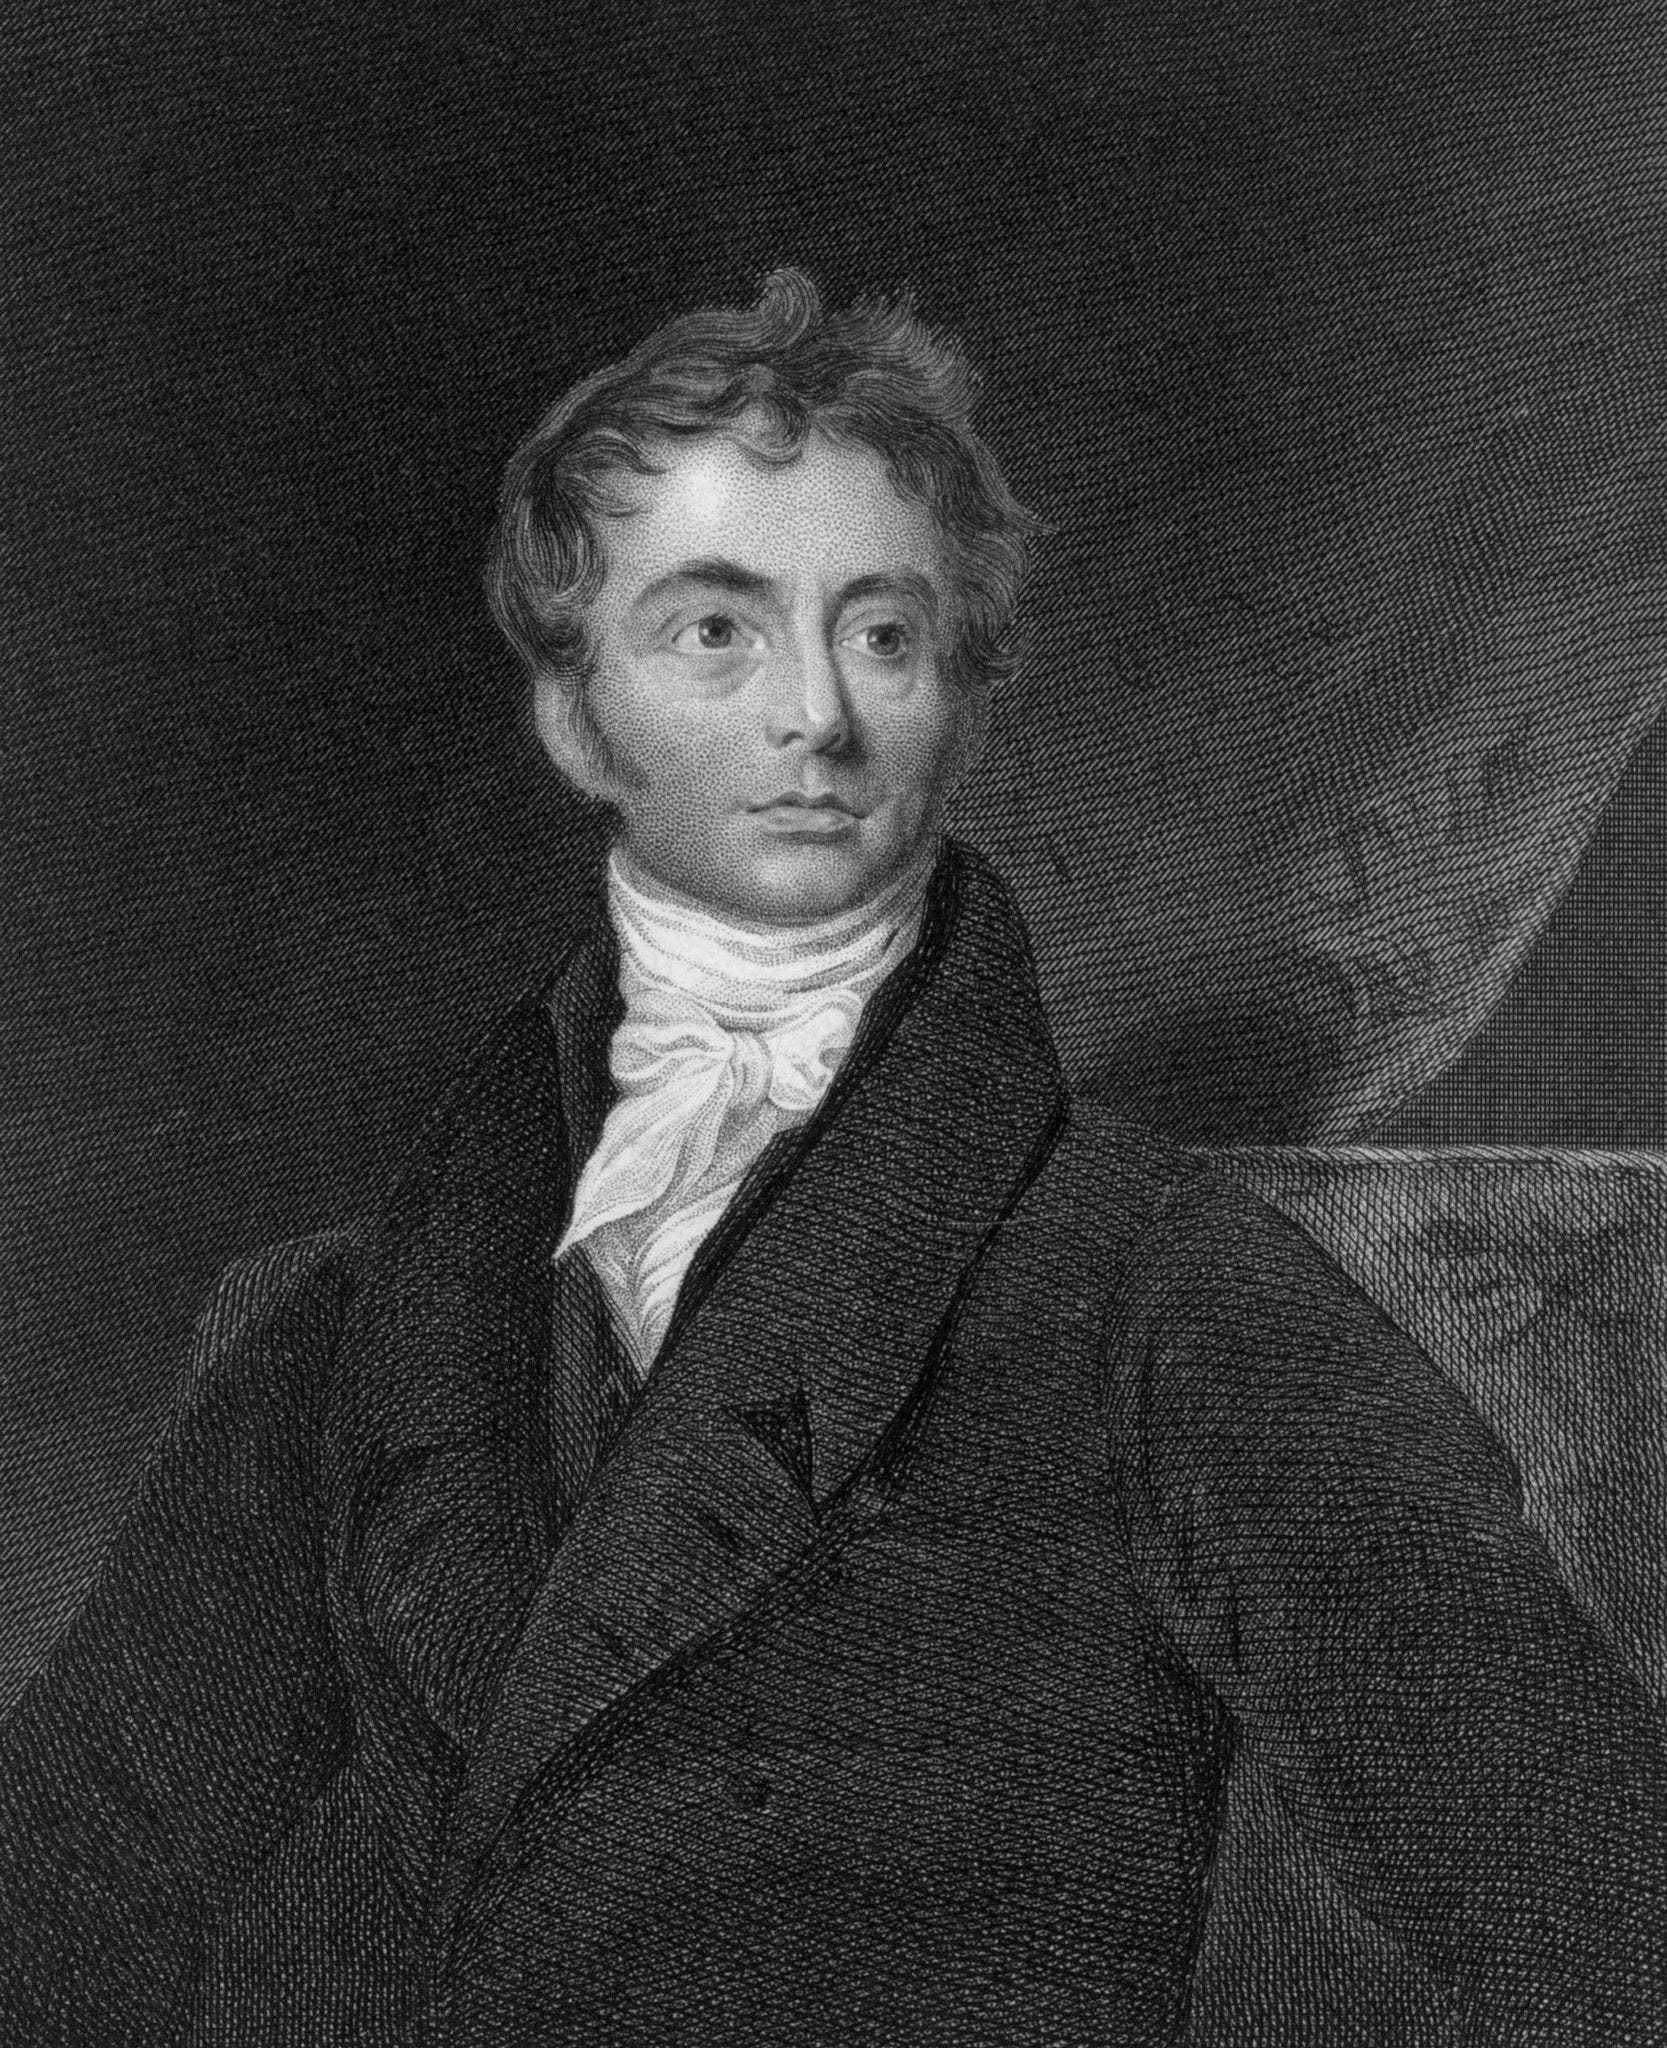 Robert Southey’s ”His Books”